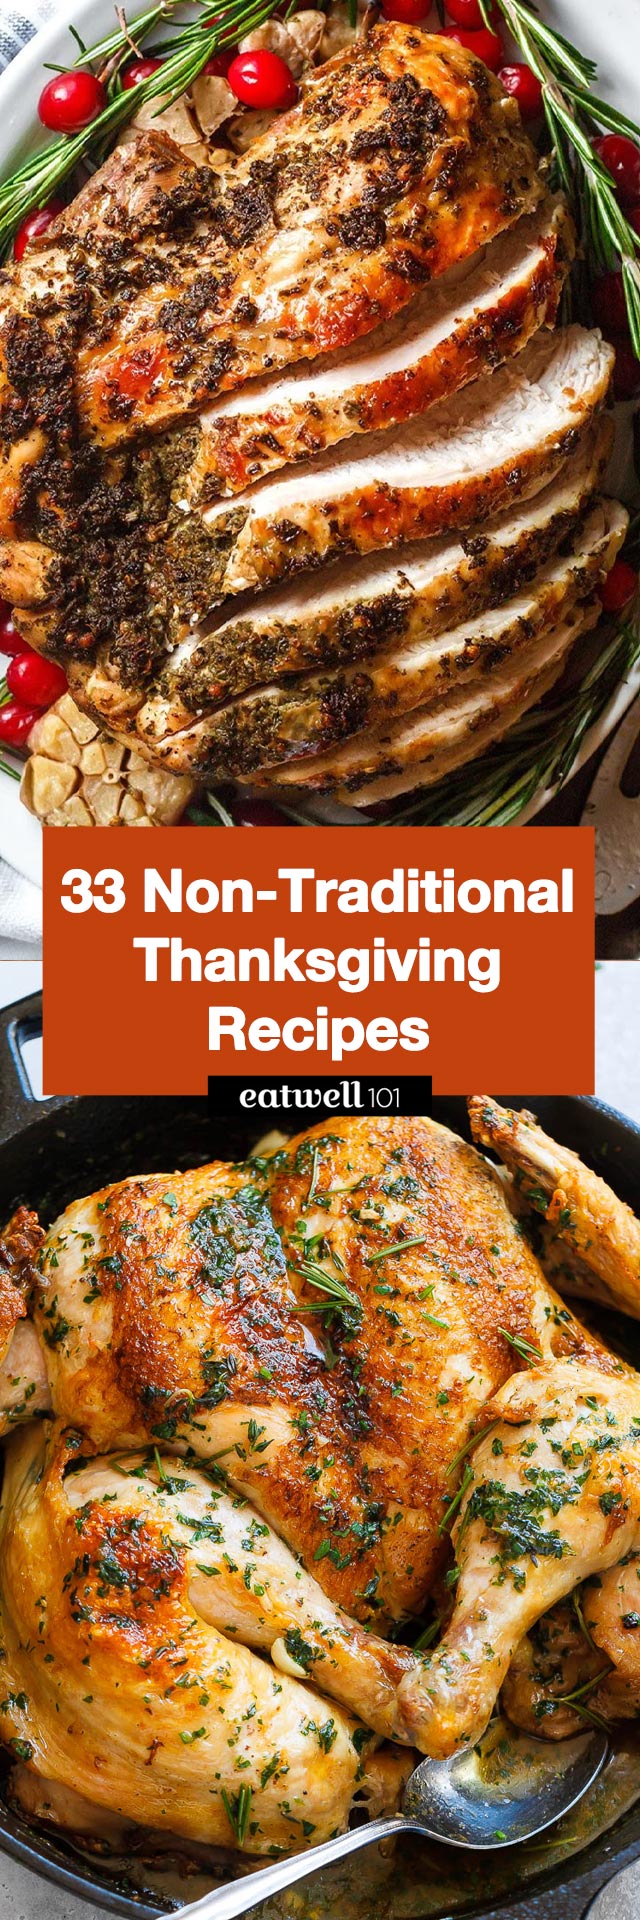 Non-Traditional Thanksgiving Dinner Recipe Ideas - #thanksgiving #recipe #eatwell101 - These non-traditional Thanksgiving dinner recipes are the perfect way to take your Thanksgiving menu from boring to memorable! 